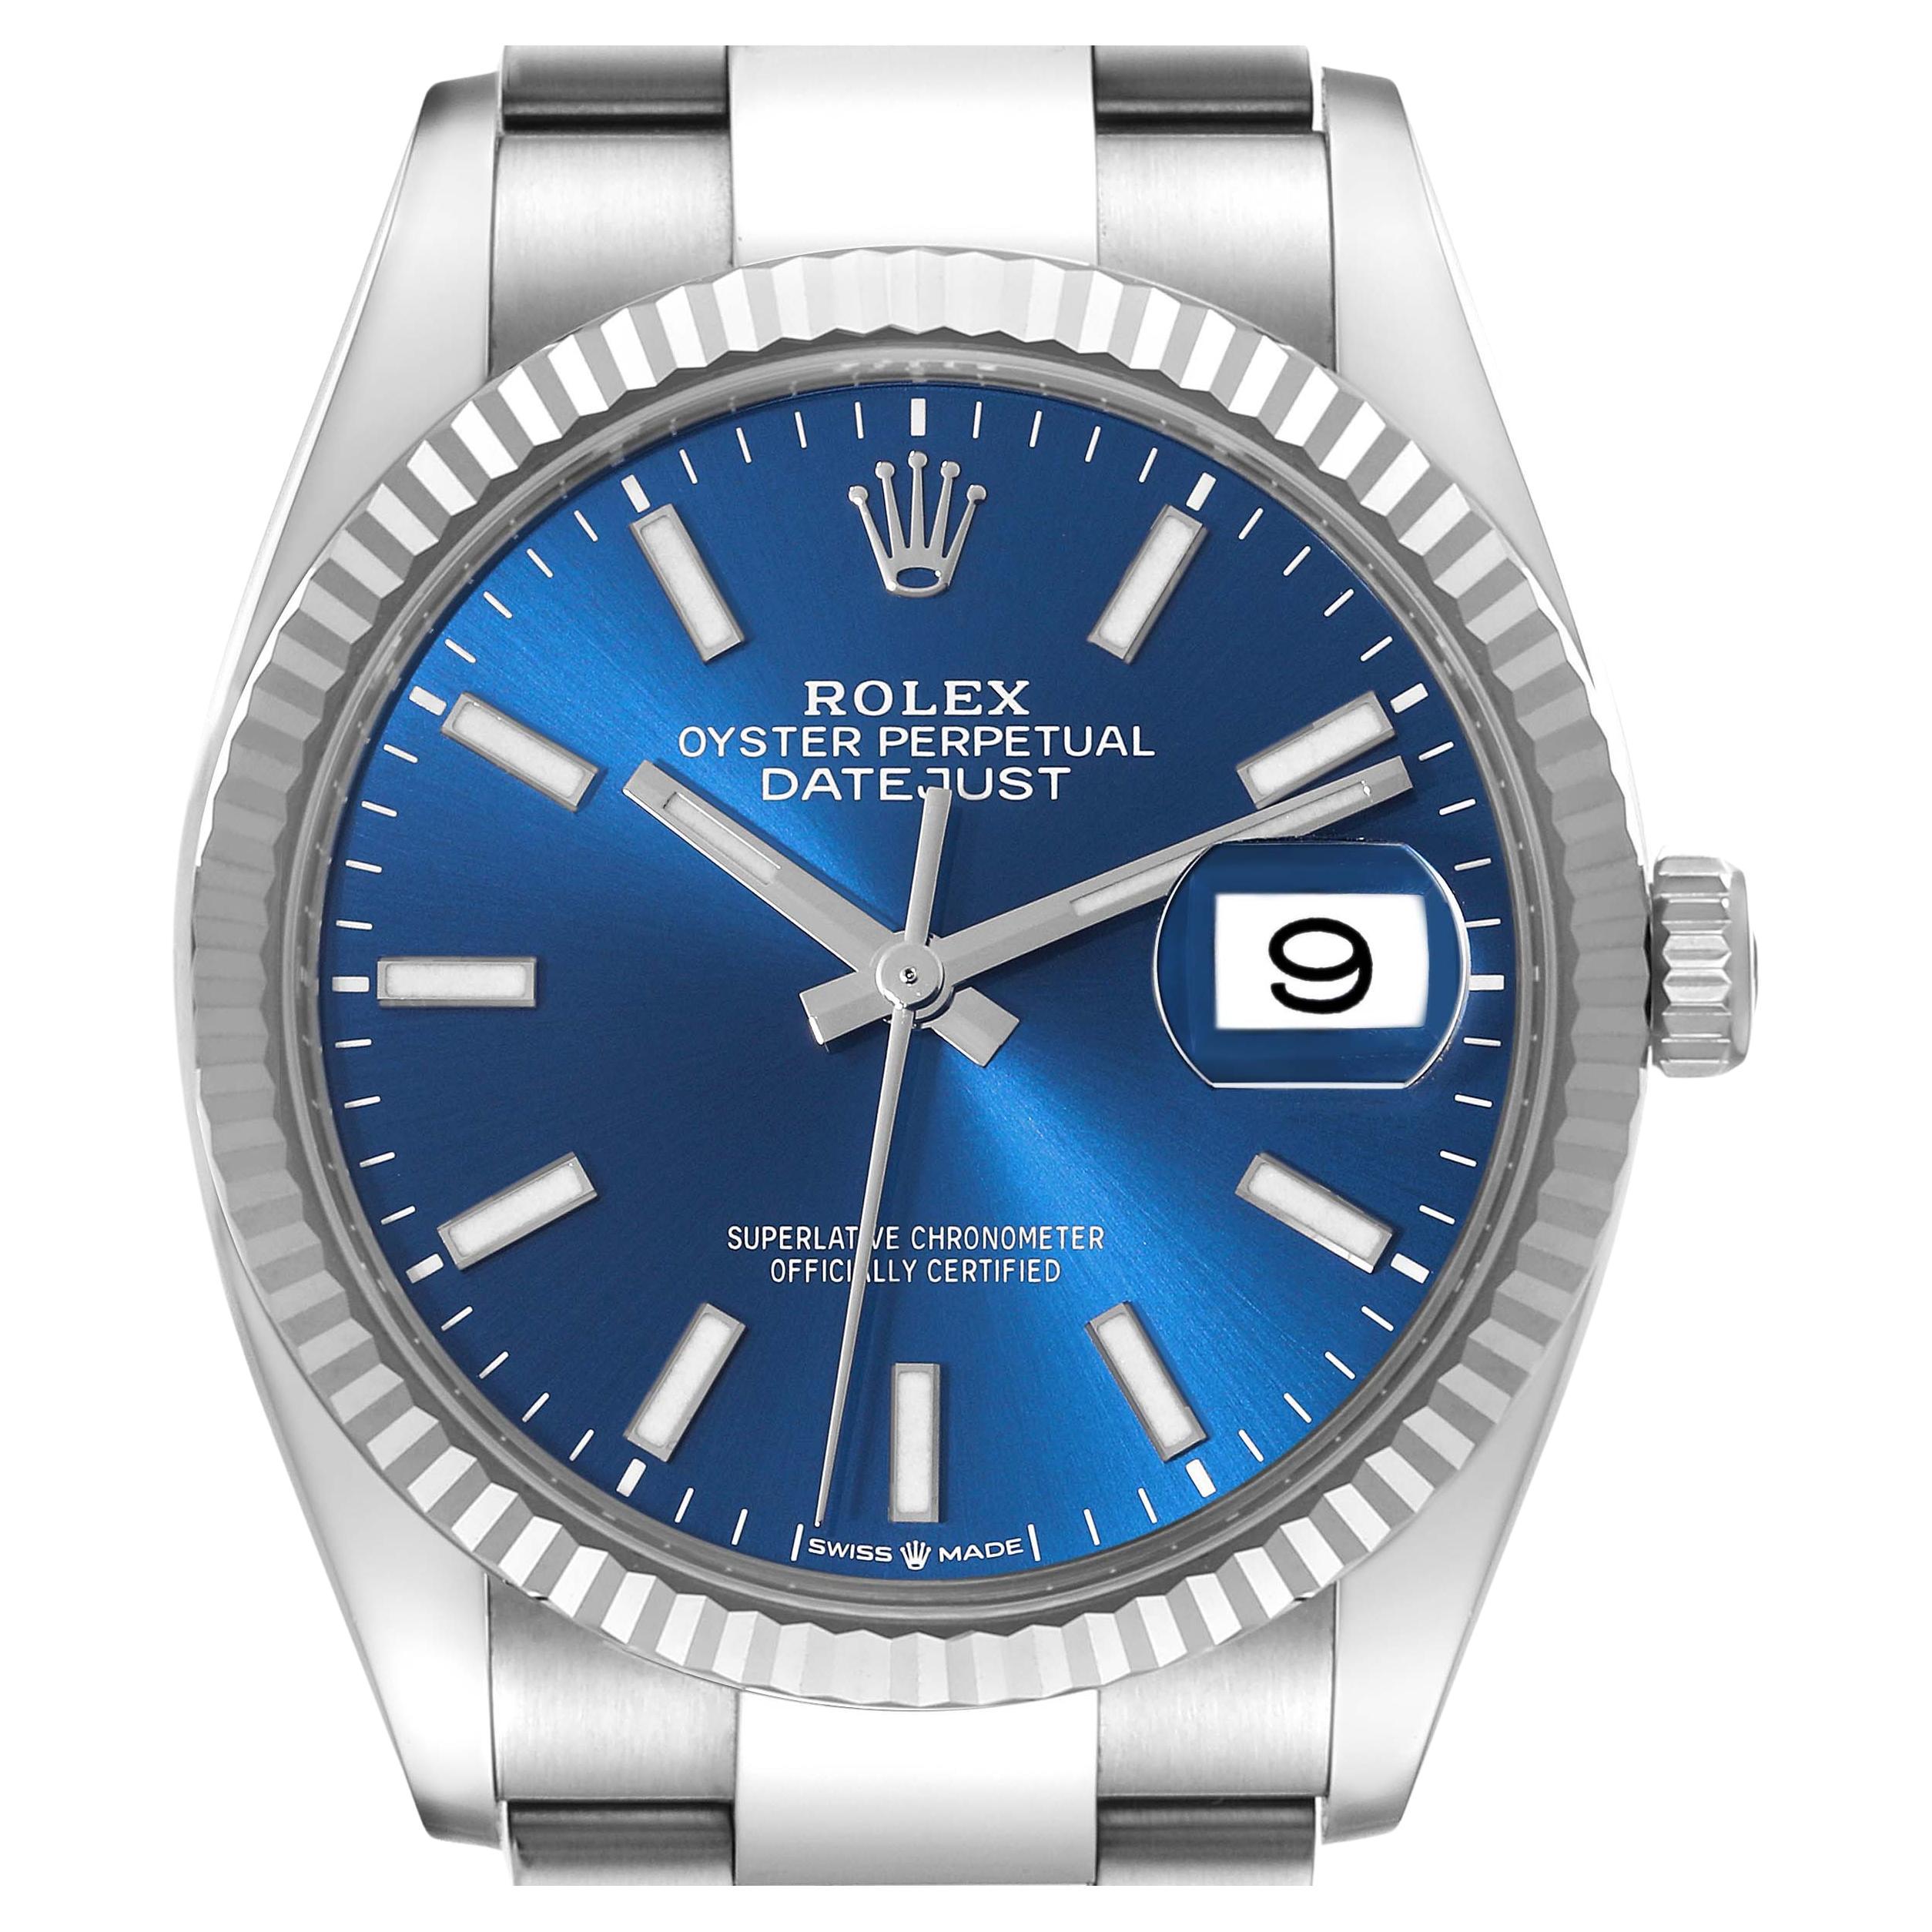 Rolex Datejust Steel White Gold Blue Dial Mens Watch 126234 Box Card For Sale